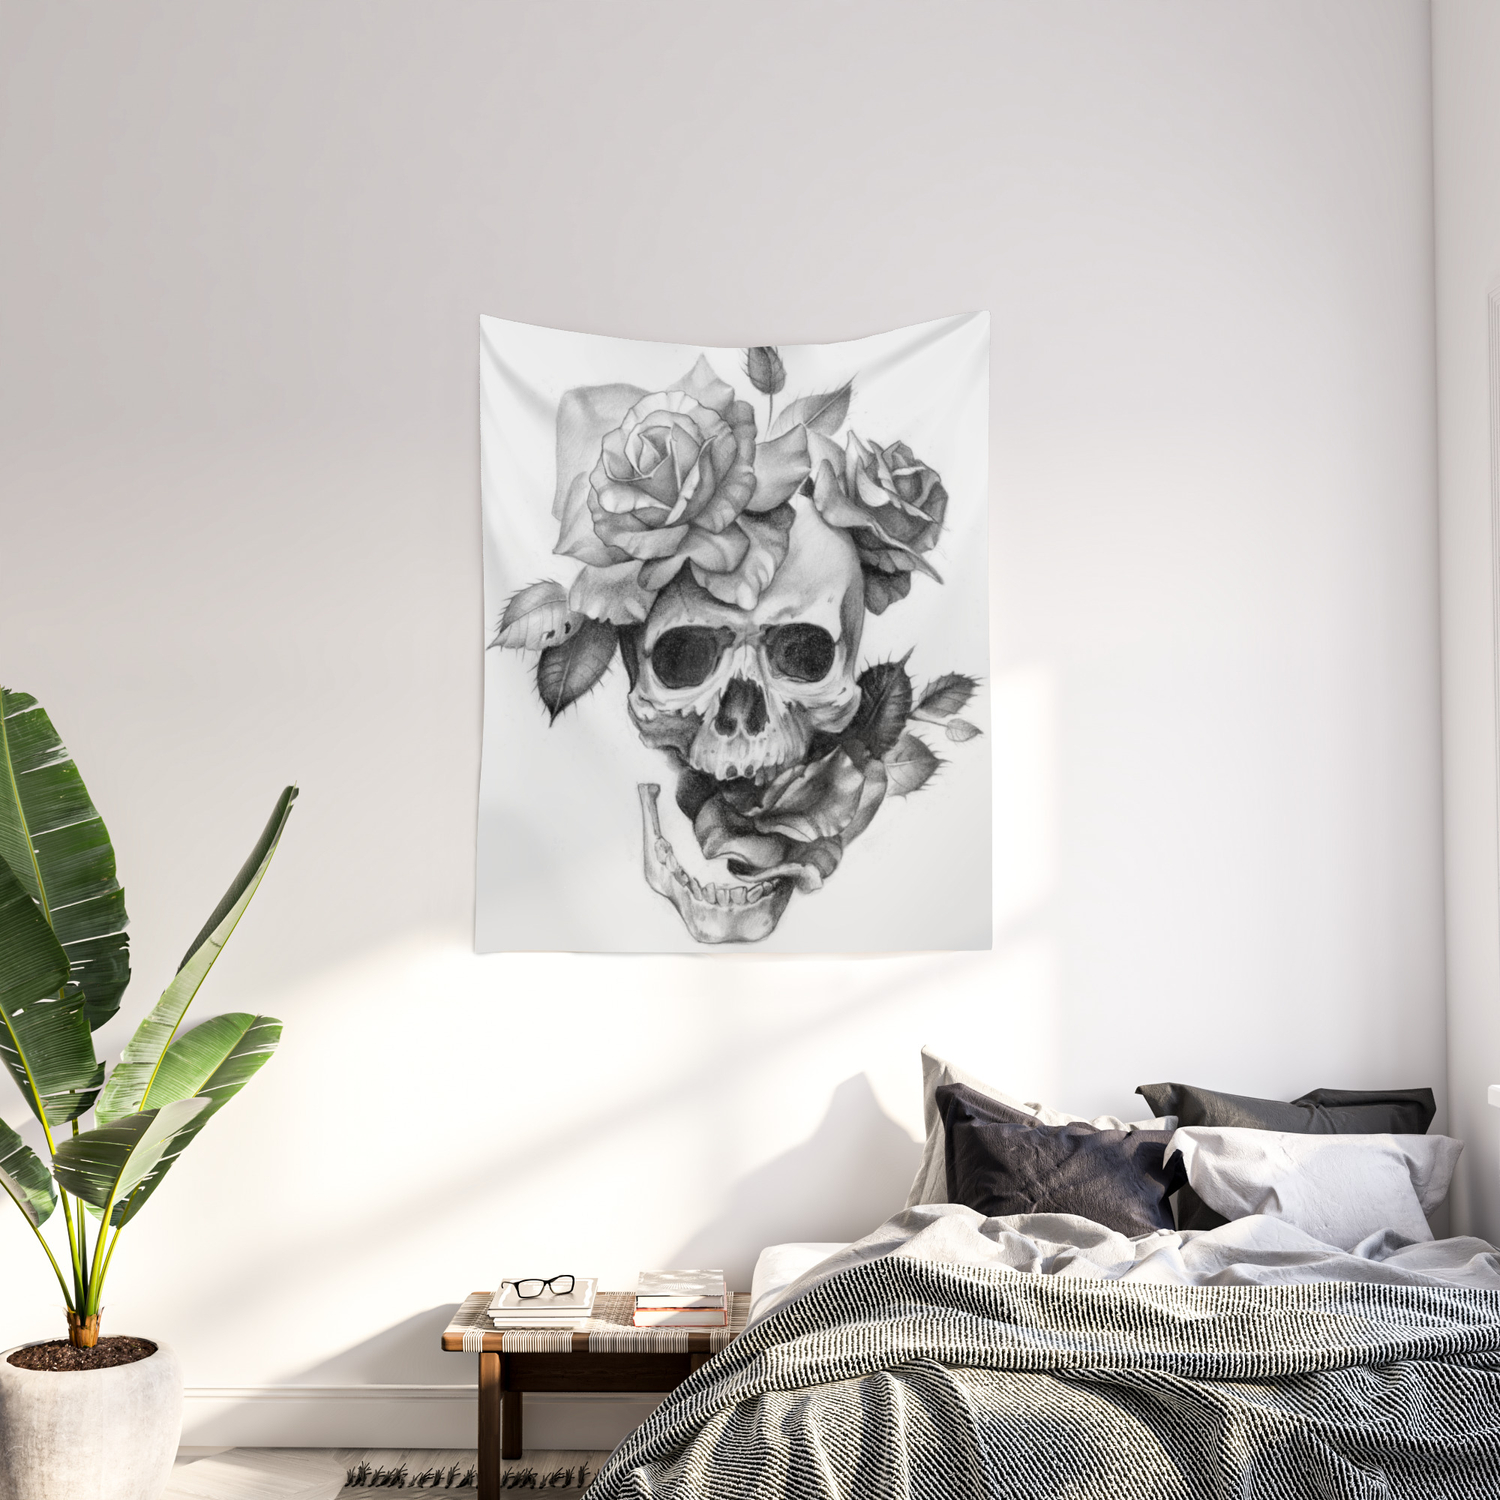 Undead Gothic Skull Red Roses Tapestry Wall Hanging Living Room Bedroom Dorm LB 